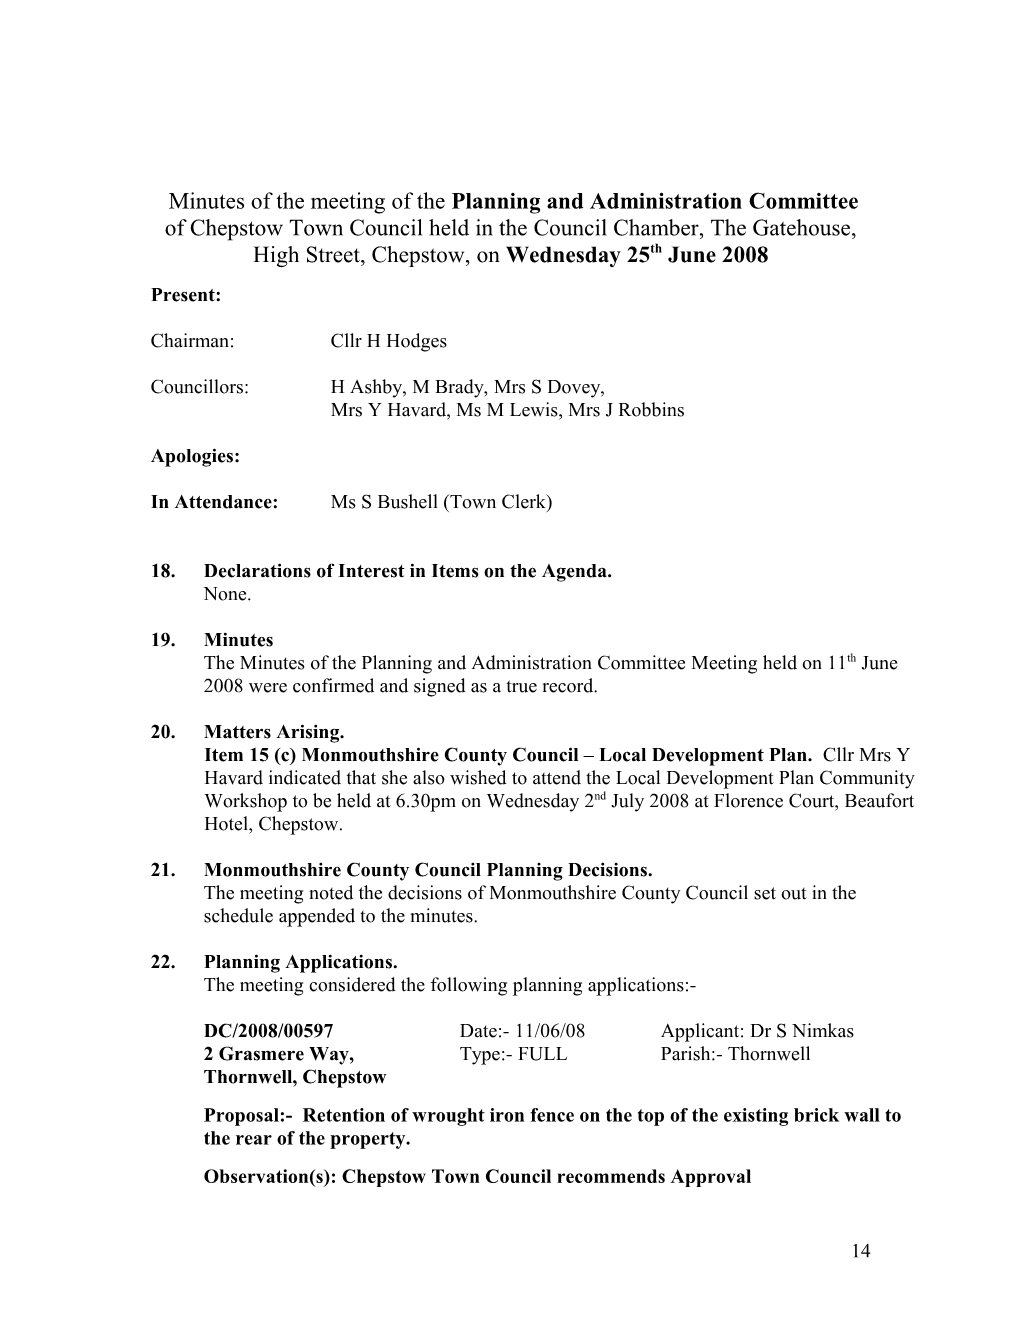 Minutes of the Meeting of the Planning and Administration Committee of Chepstow Town Council